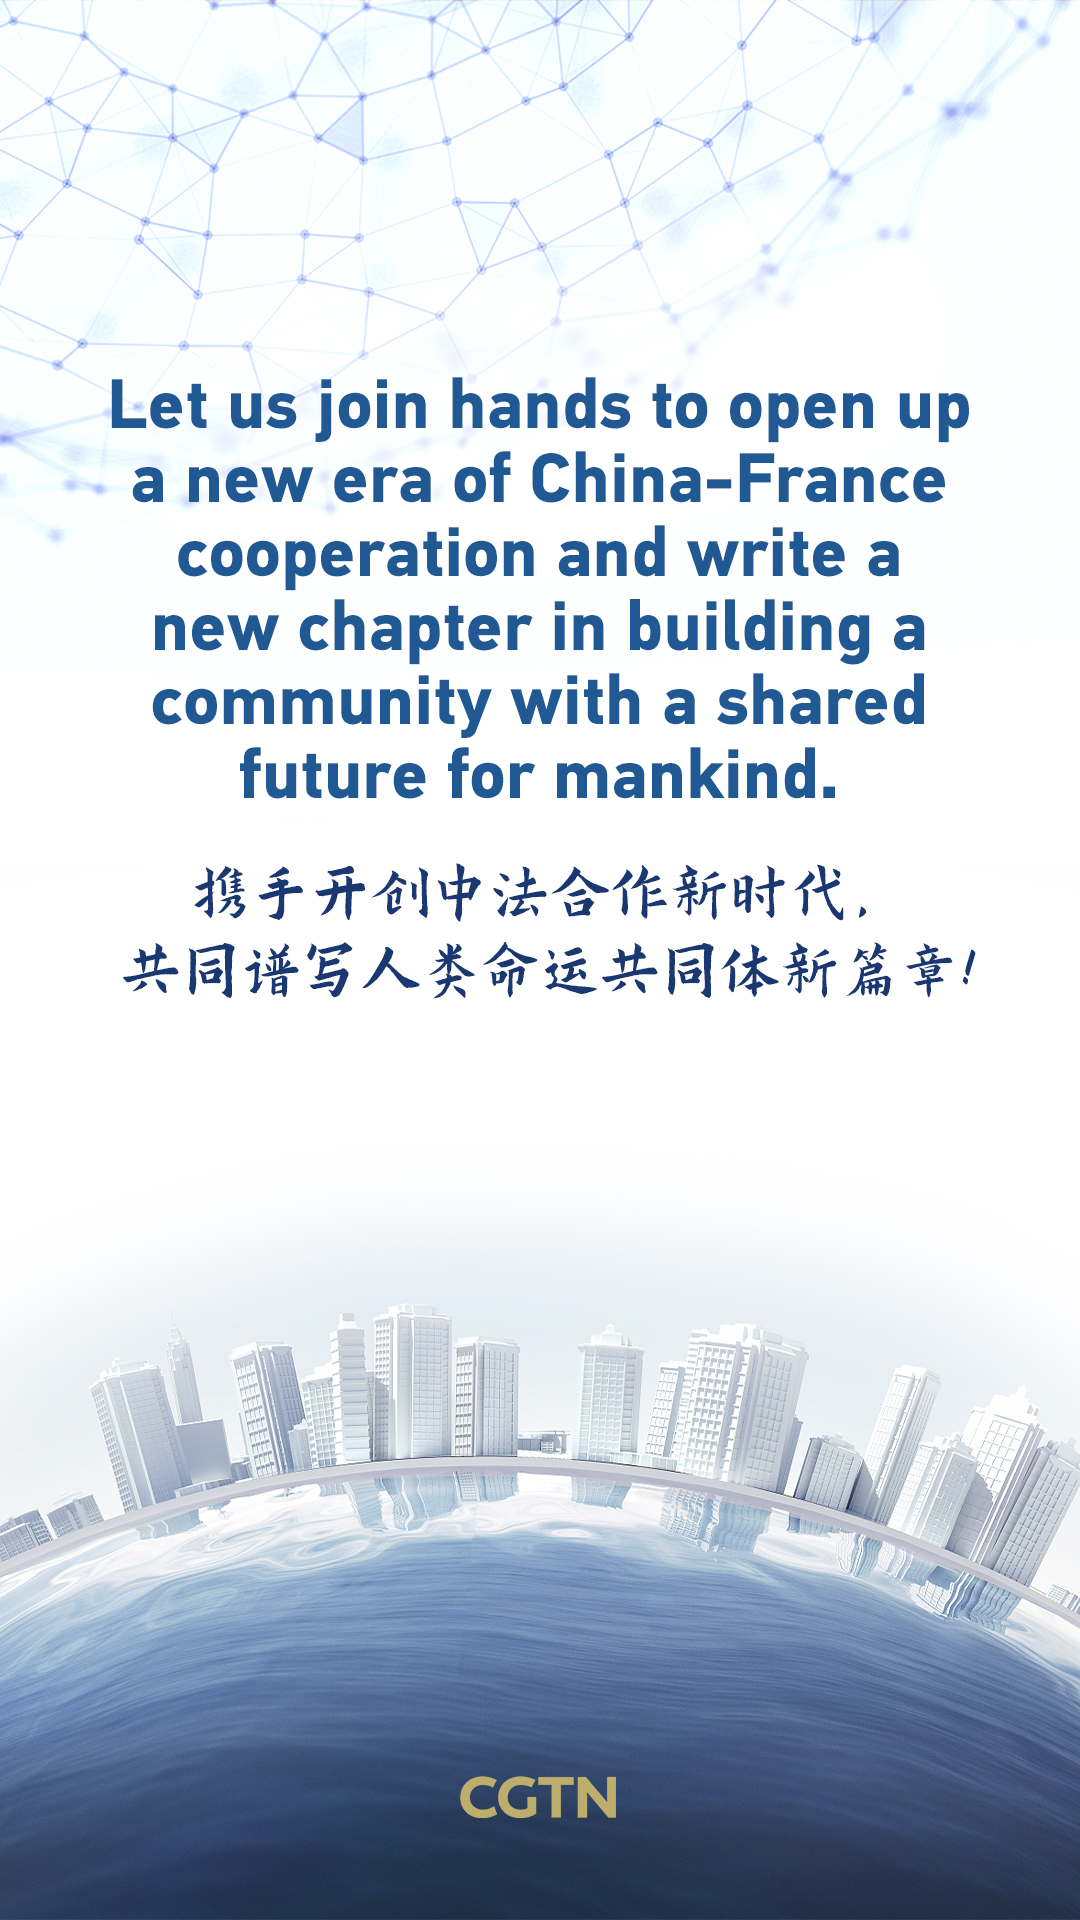 President Xi Jinping's key quotes on China-France relations